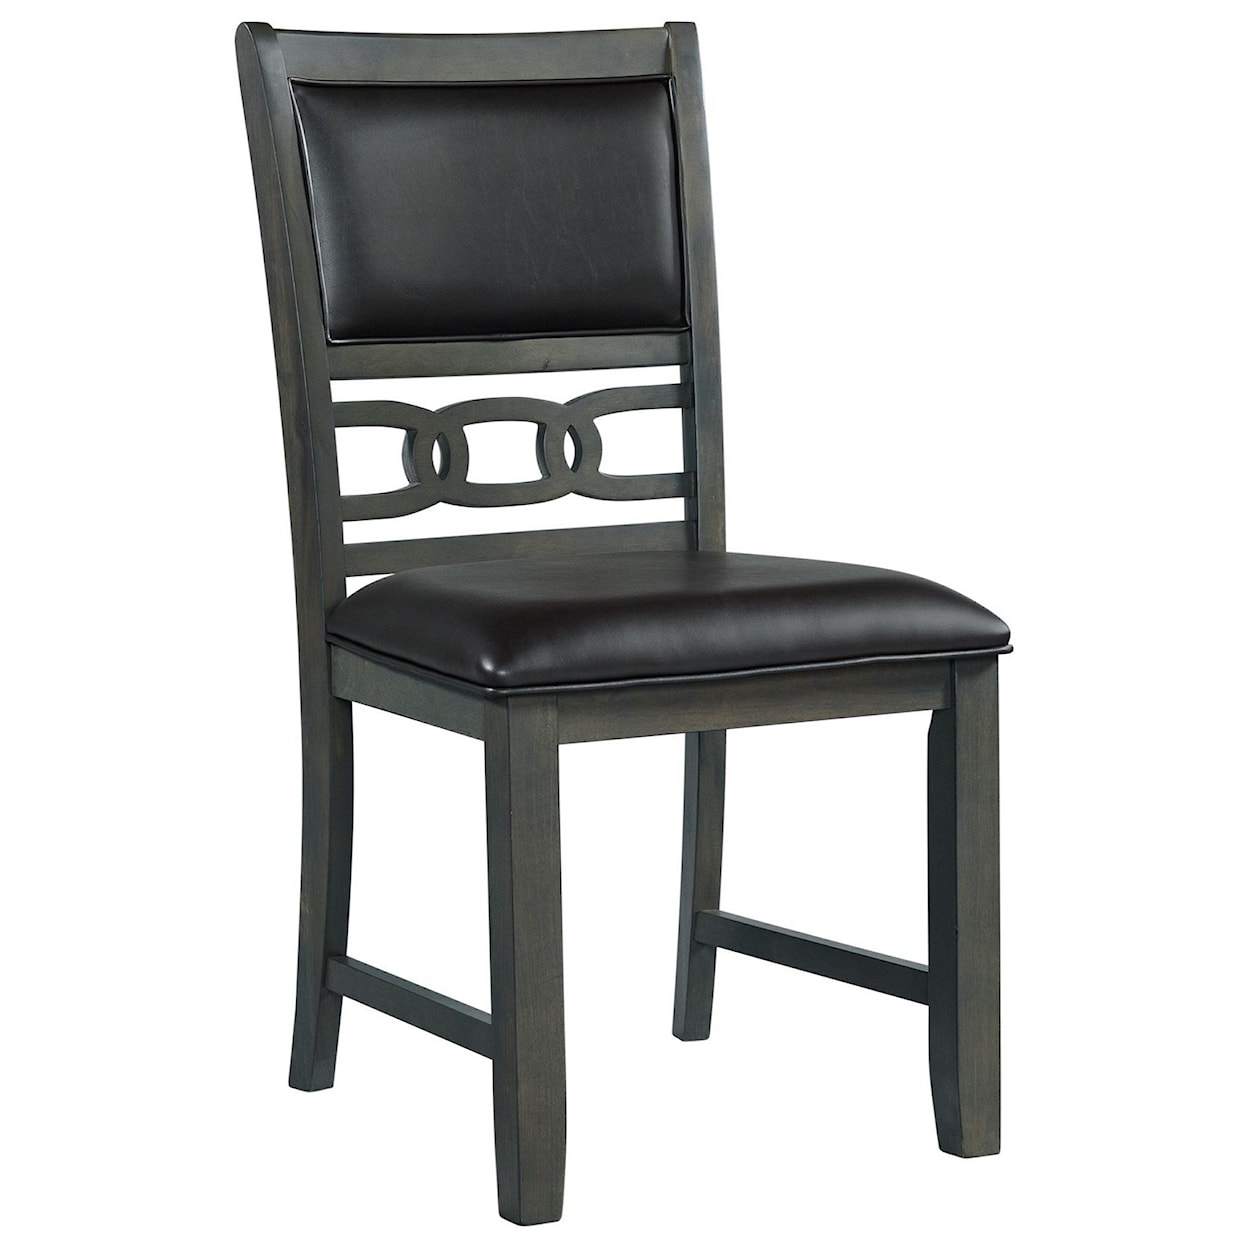 Elements International Amherst Standard Height Faux Leather Side Chair